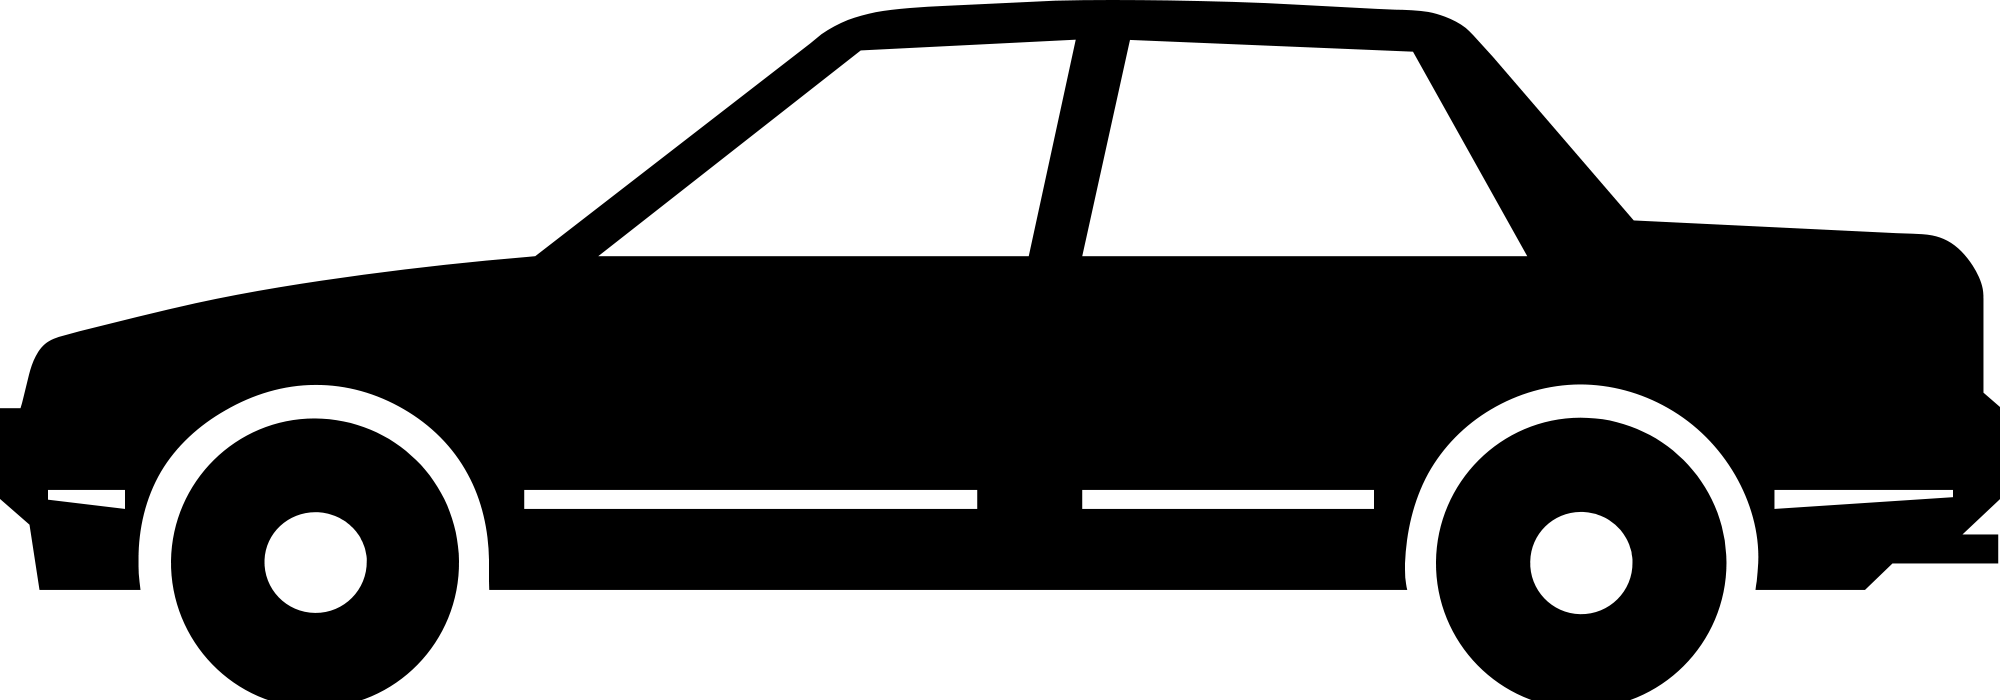 Open - Black And White Transparent Background Car Cartoon (2000x700)